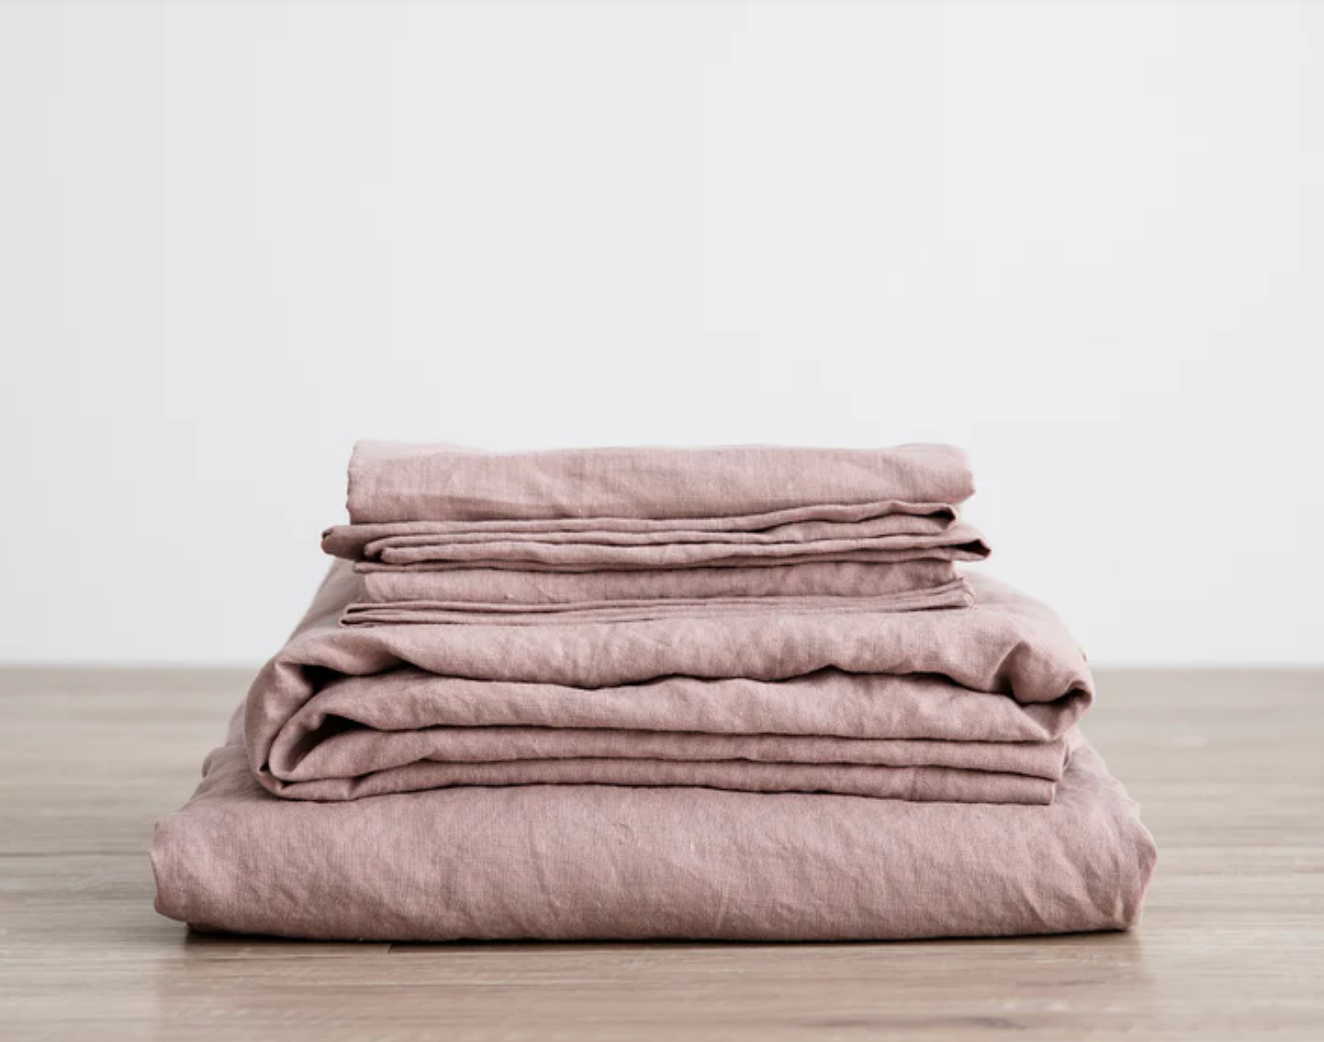 Dusk linen sheets by Cultiver